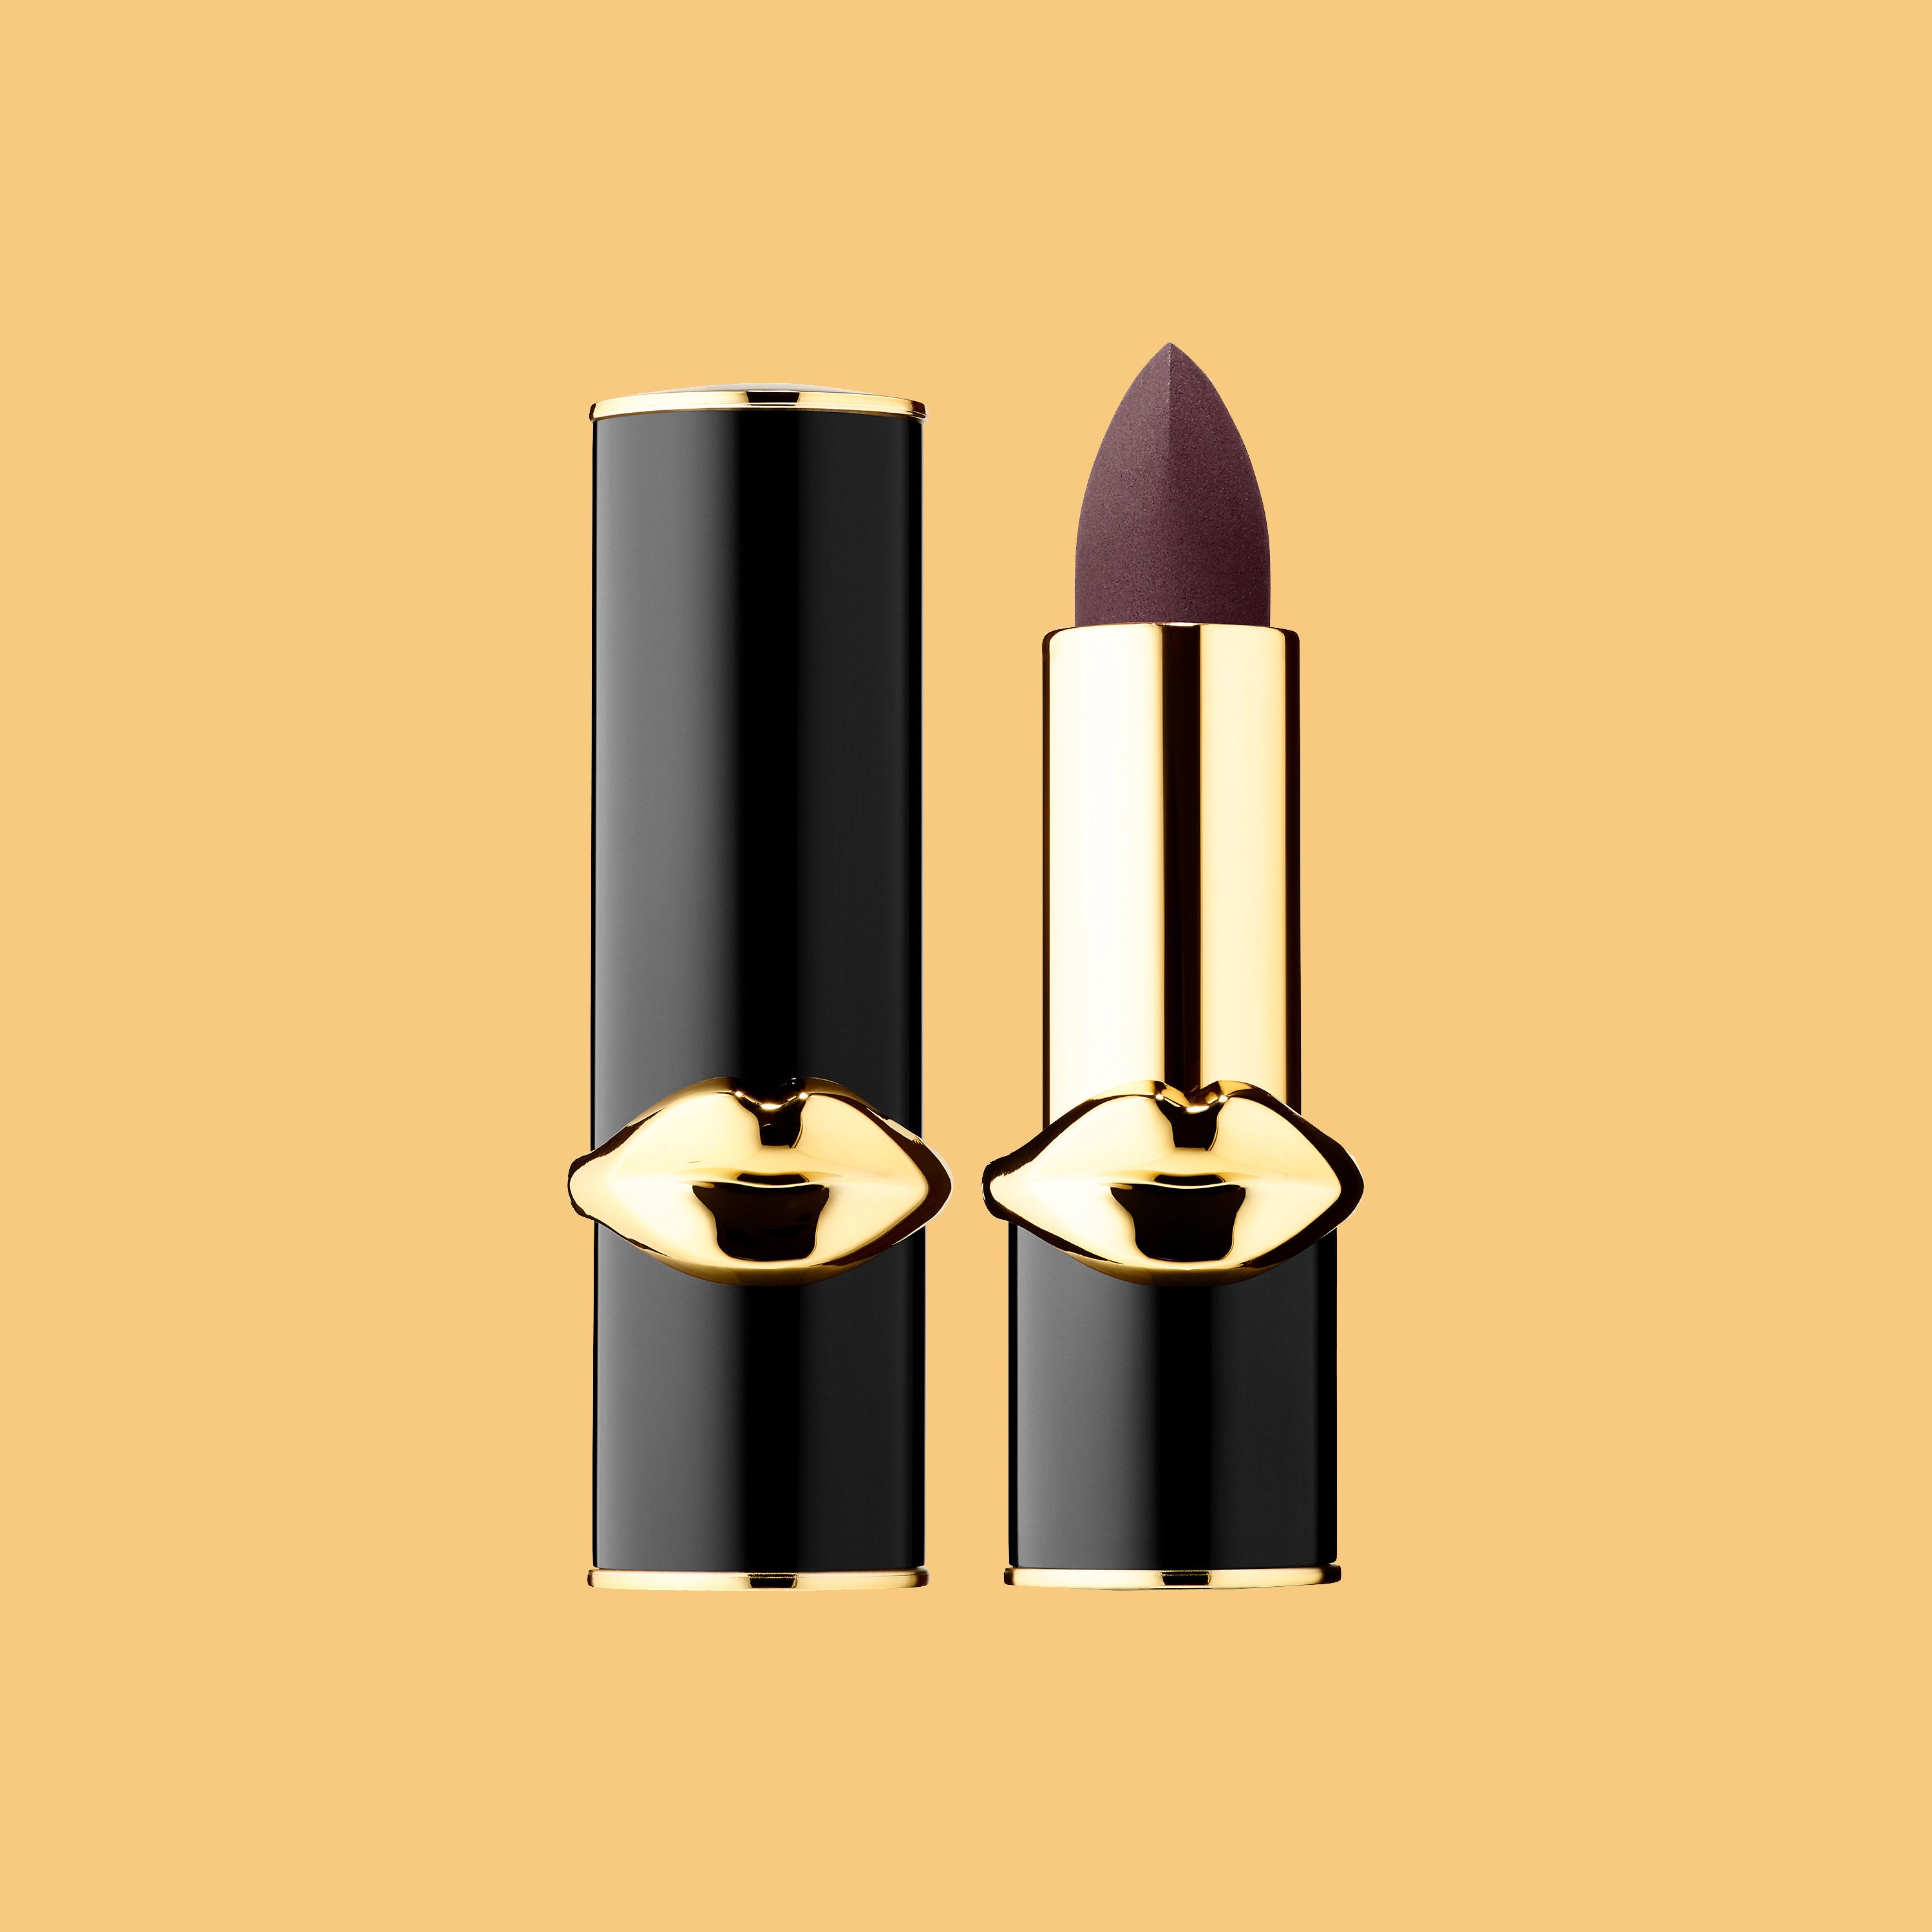 21 Vampy Berry Lipsticks That’ll Get You Excited For Fall